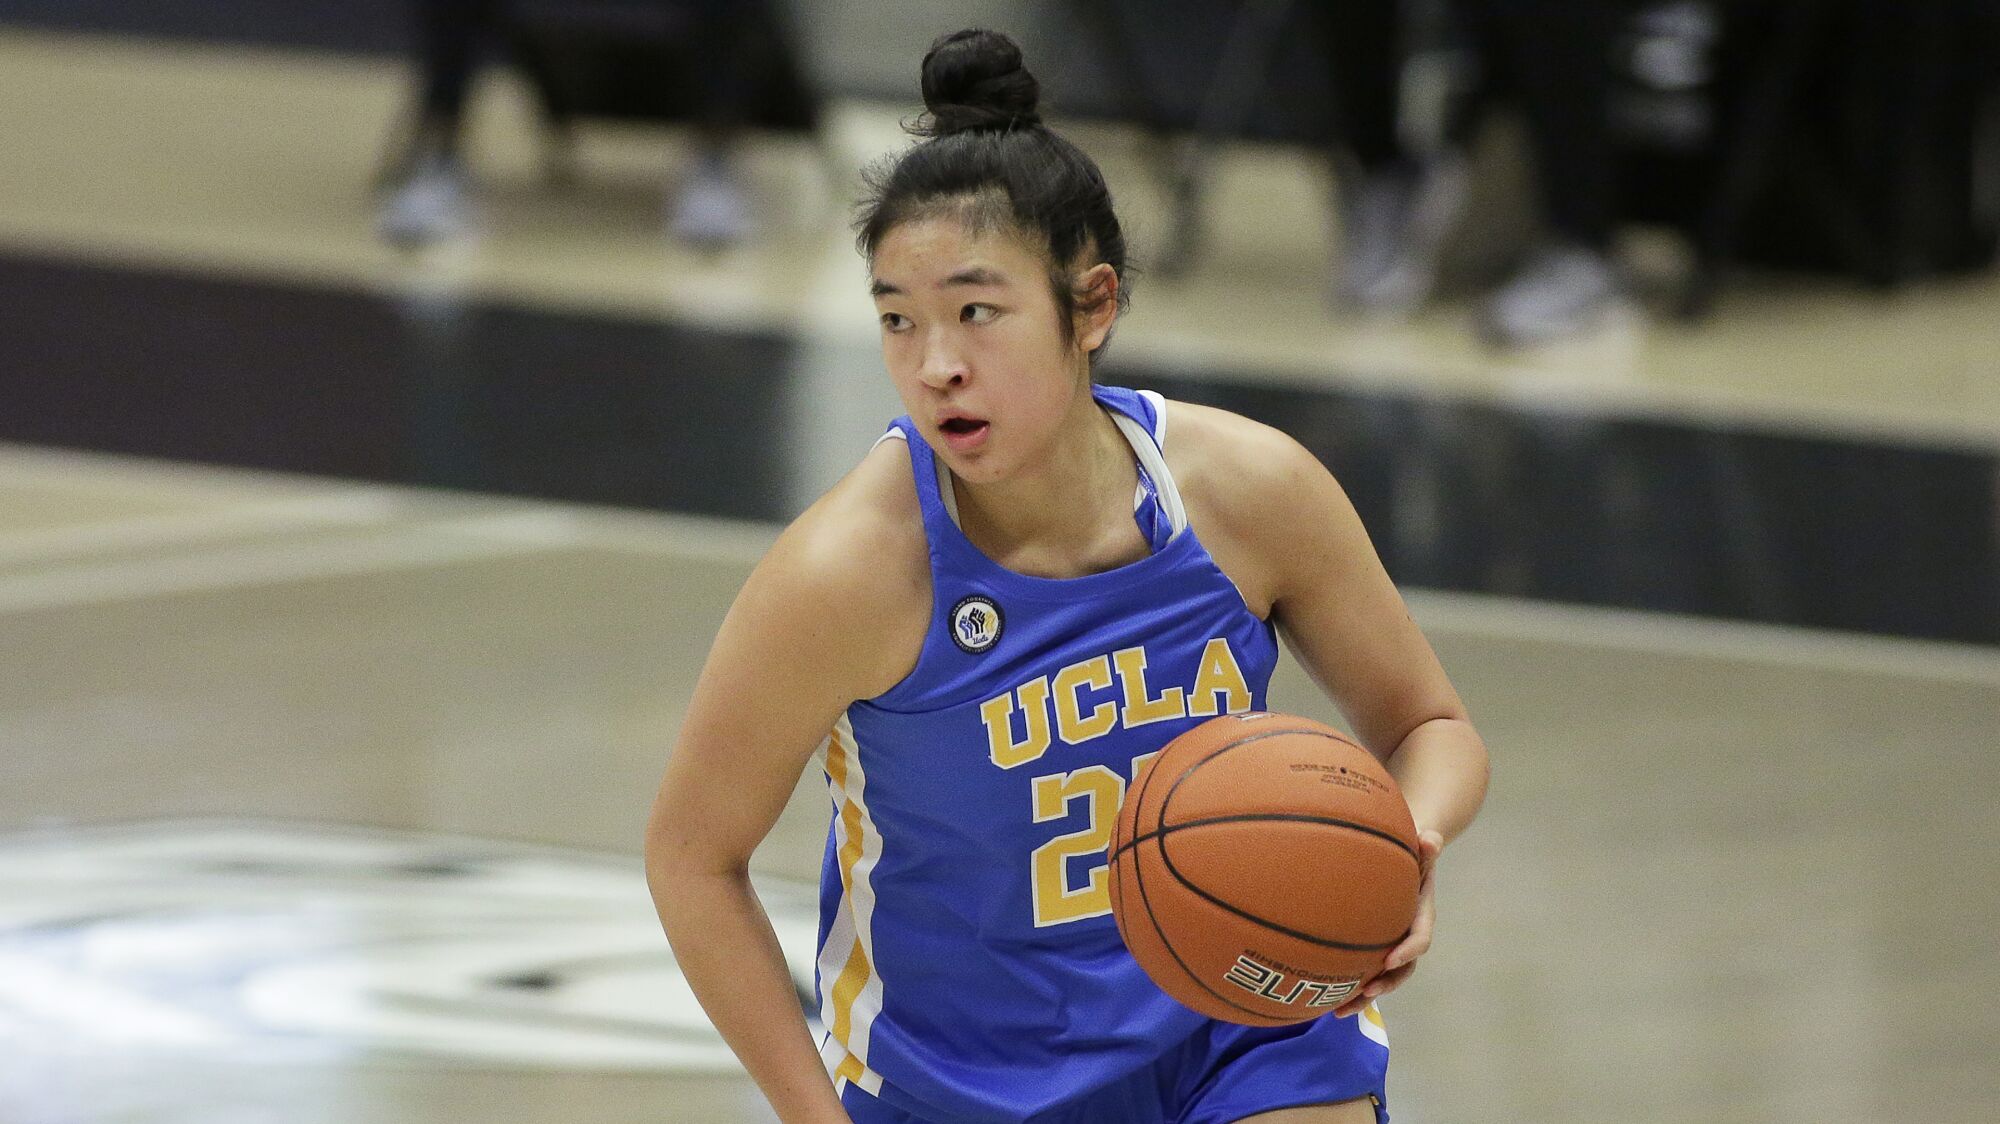 UCLA guard Natalie Chou brings the ball up the court.